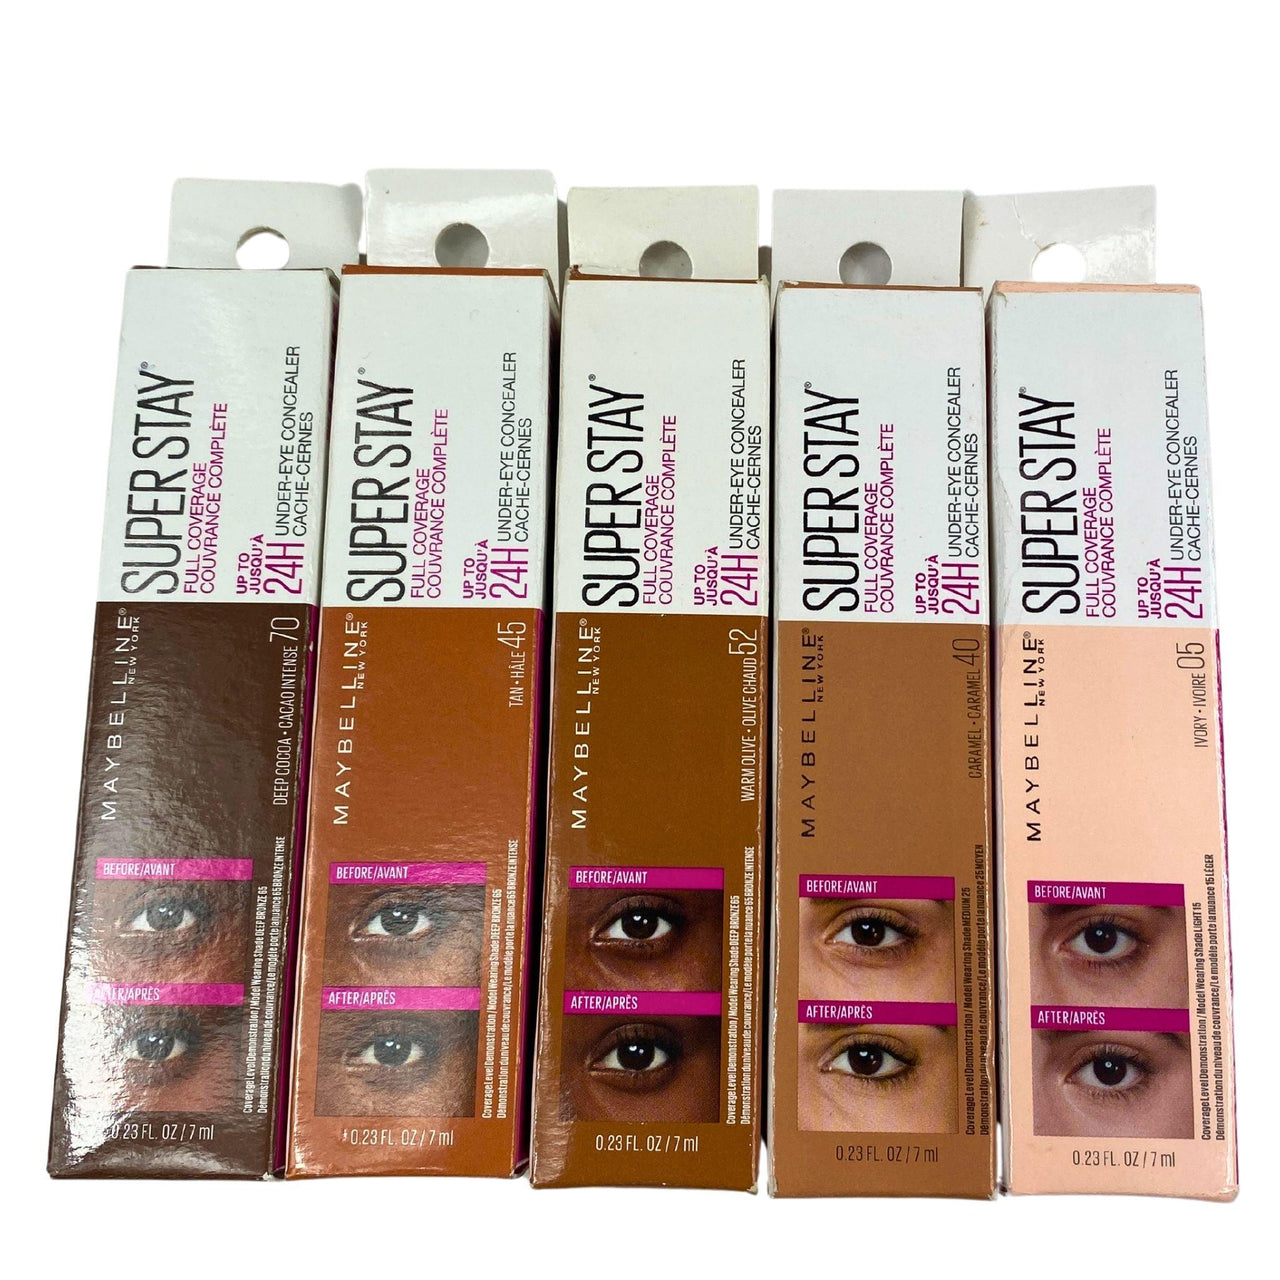 Maybelline New York Super Stay Super Stay Full Coverage Liquid Makeup (45 Pcs Lot) - Discount Wholesalers Inc